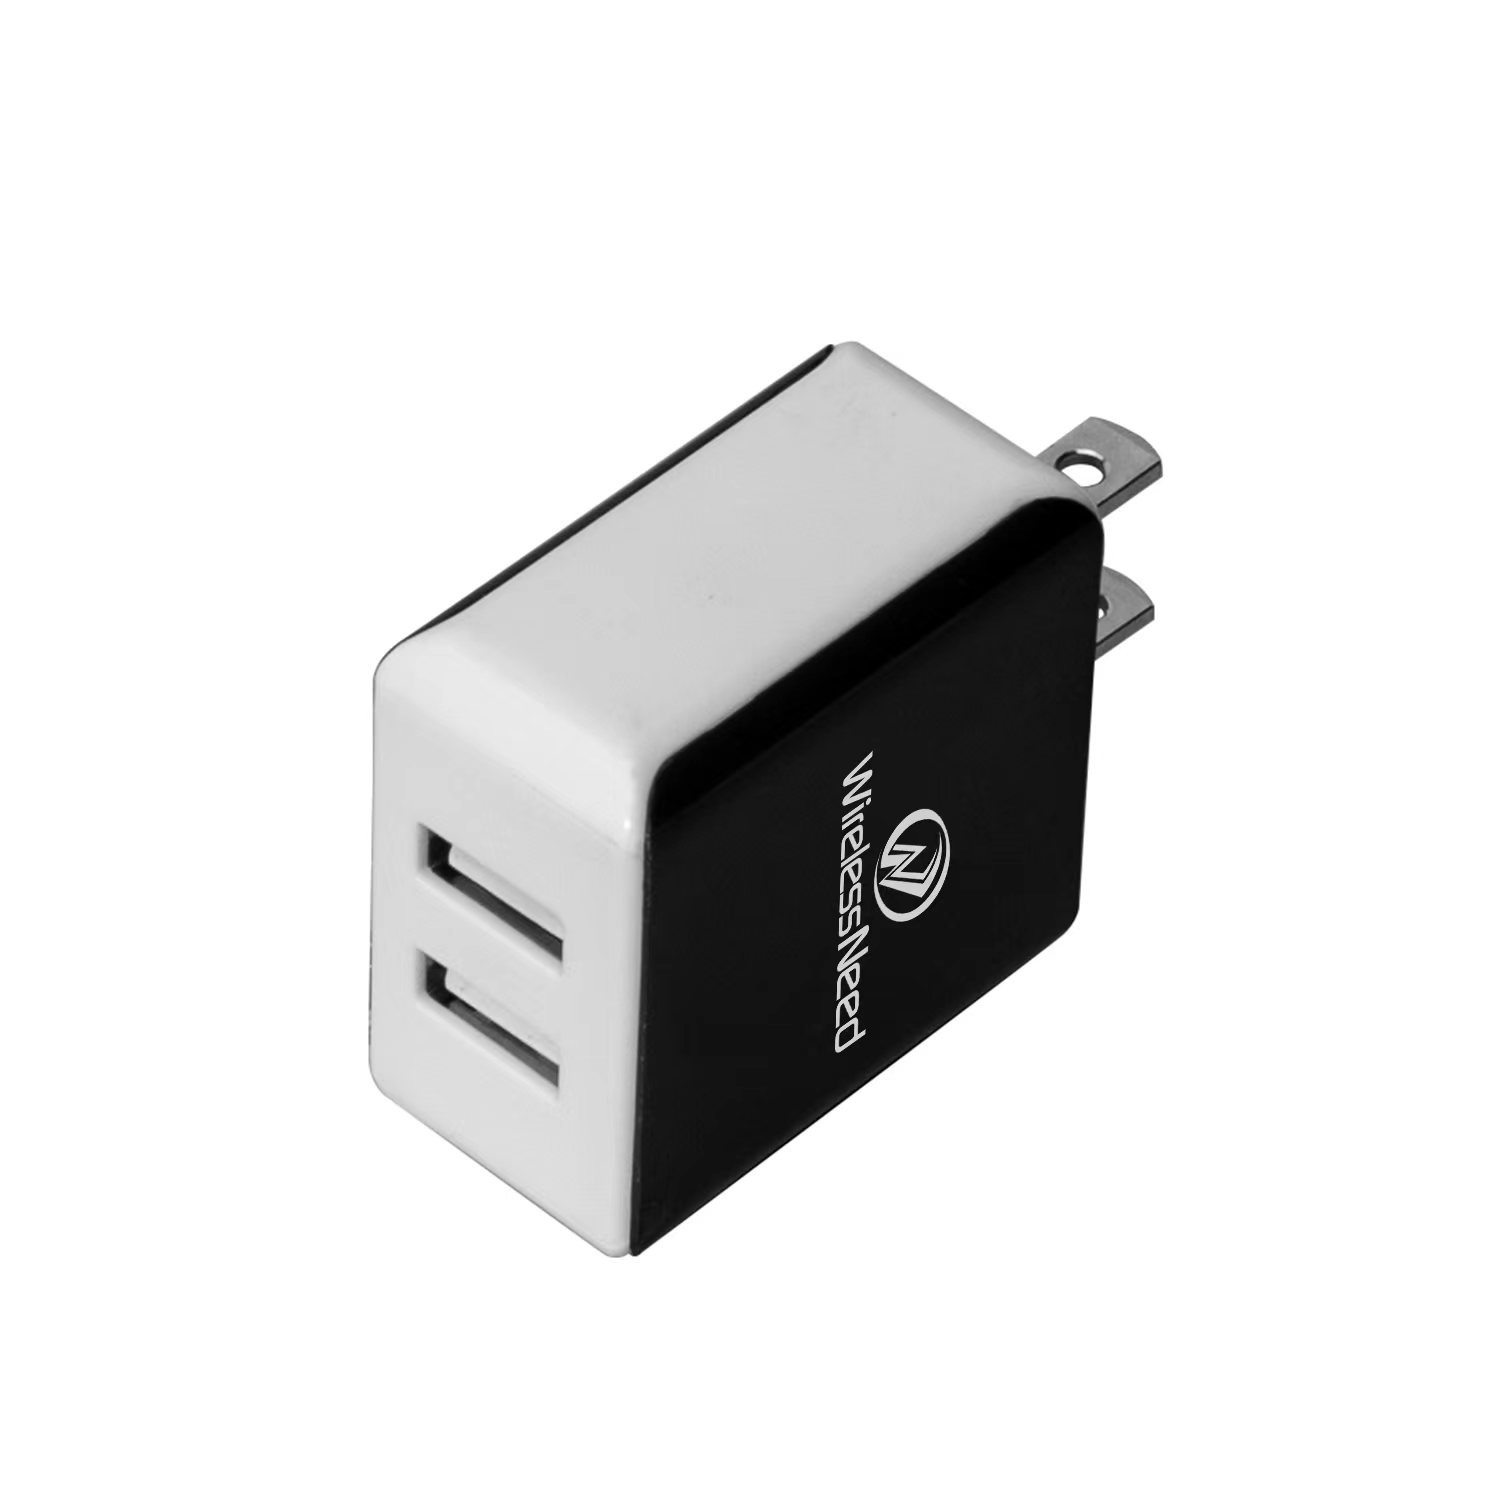 Dual USB Wall Charger Details